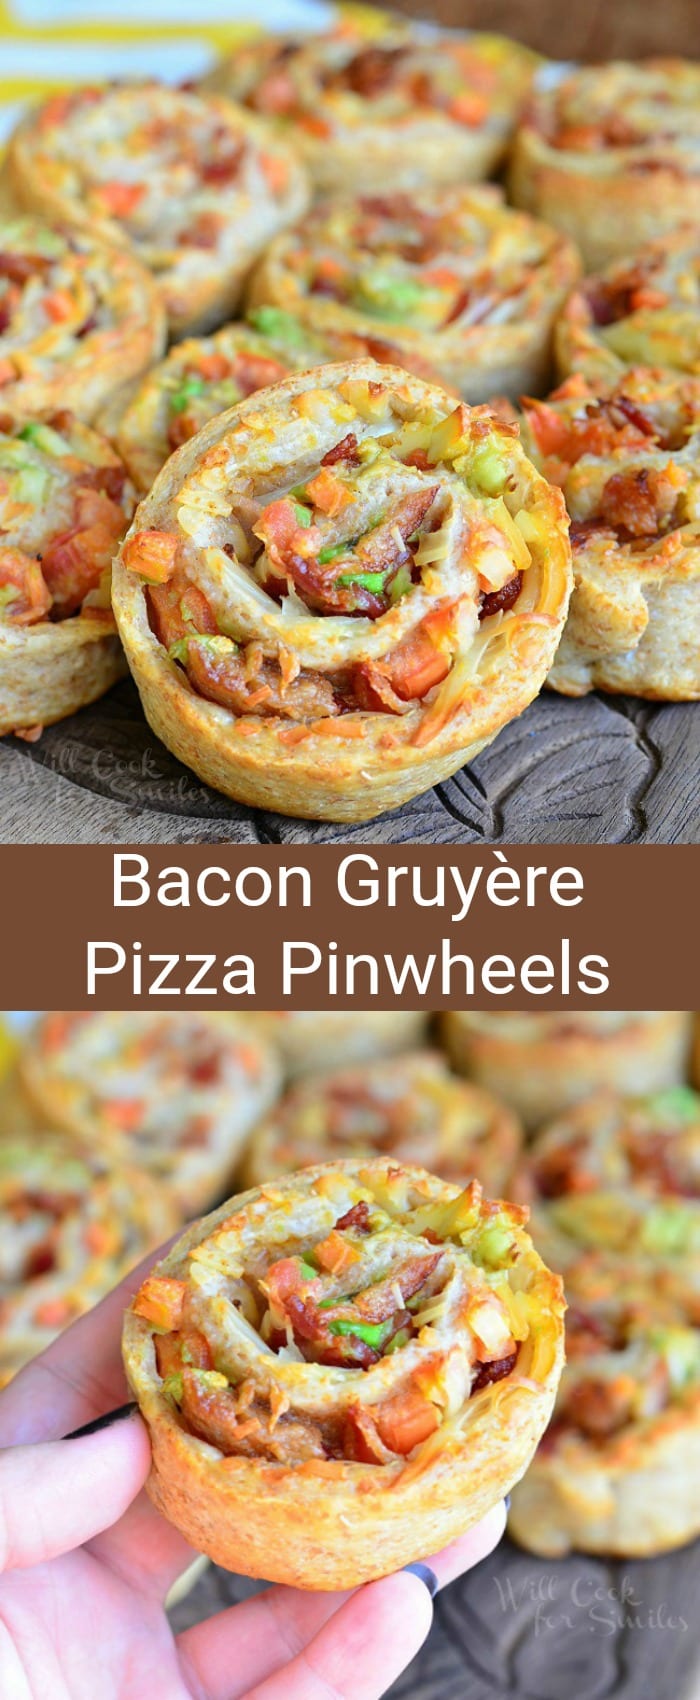 Bacon Gruyere Pizza Pinwheels. Great warm appetizer made with whole grain pizza dough, crispy bacon, Gruyere cheese, tomato and avocado. #appetizer #snack #pinwheels #pizza #bacon #partyfood